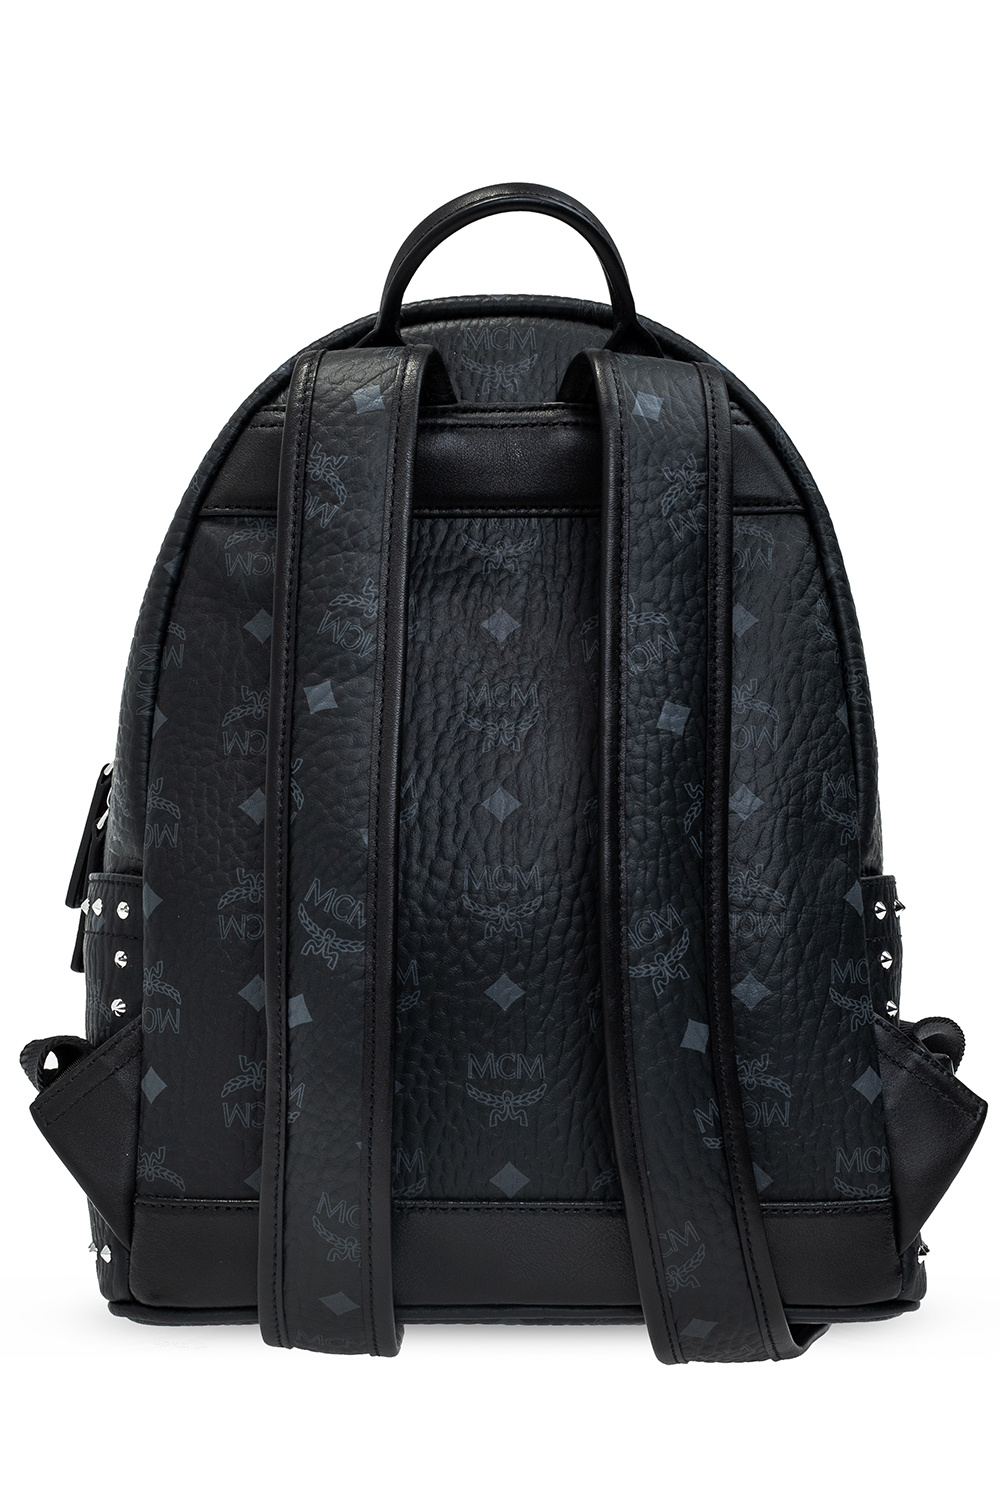 MCM Iconic Tommy Backpack Mono AW0AW09956 DW5